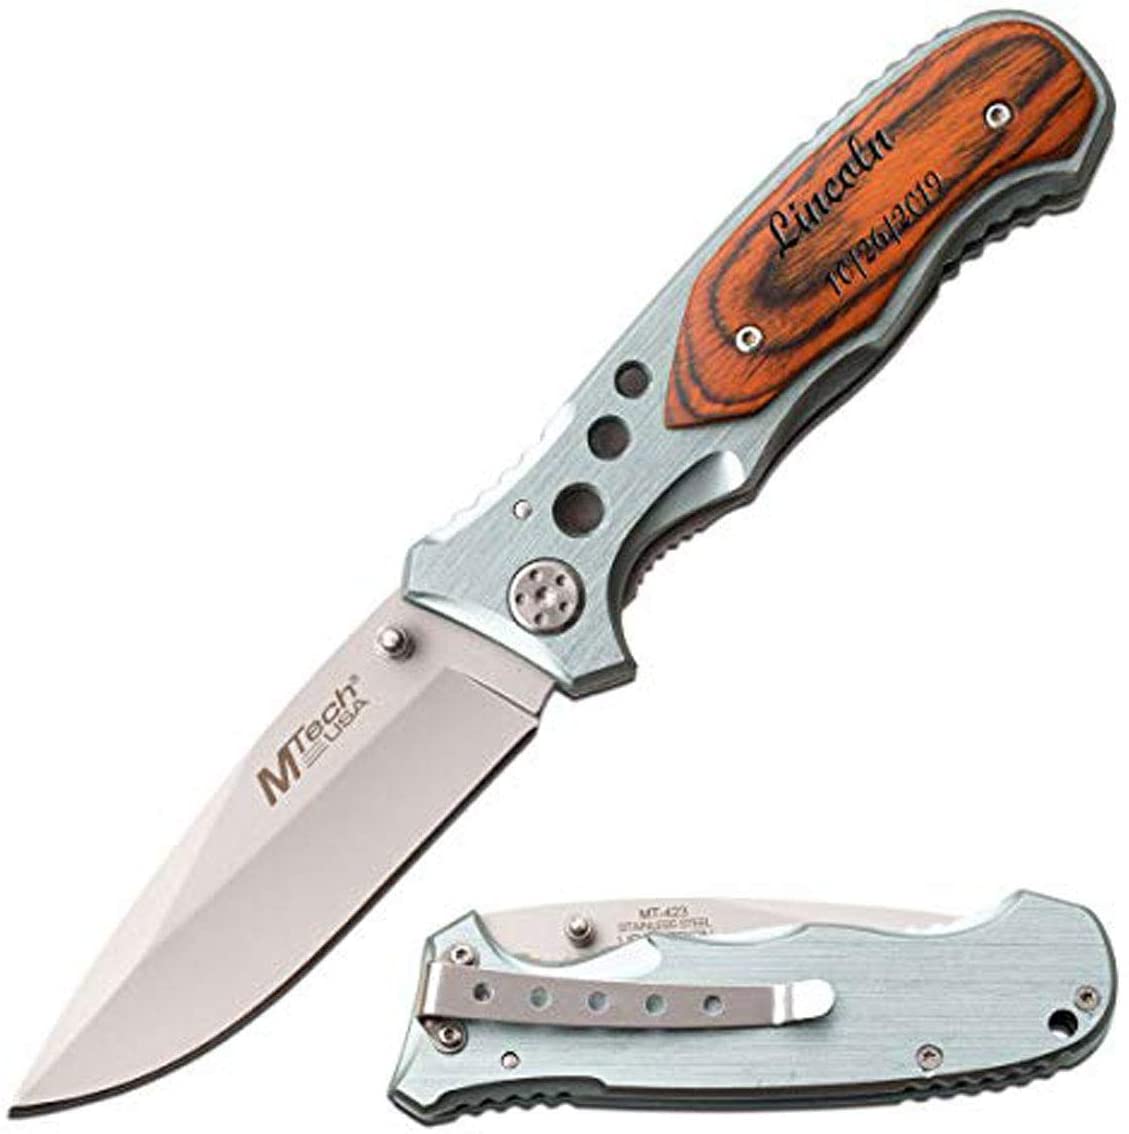 GIFTS INFINITY Personalized 4.5" Pocket Knife Engraved for Men Tactical Assisted Opening Knives with Pocket Clip